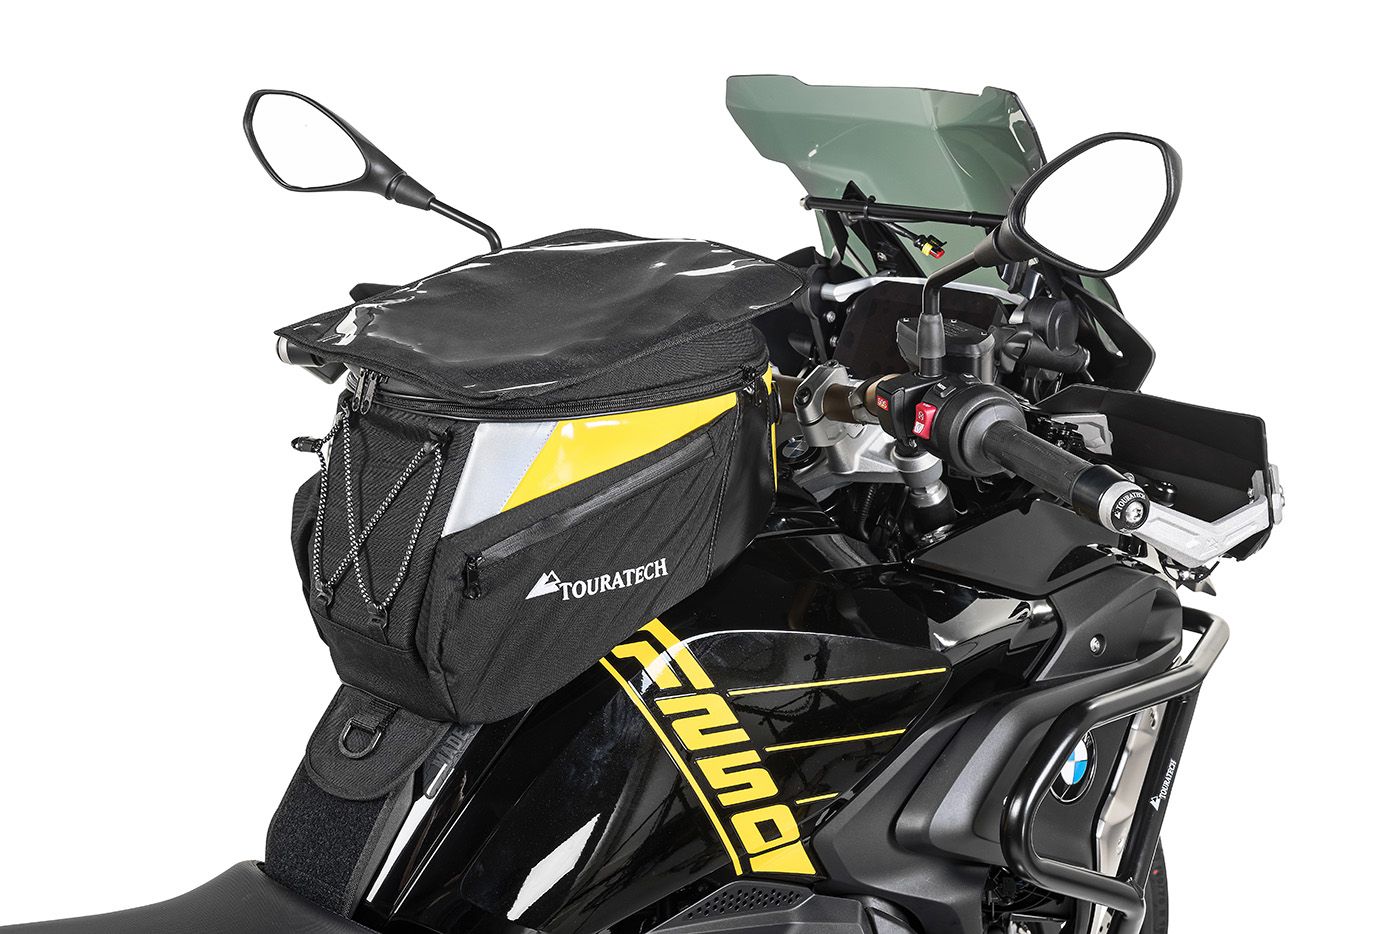 Tank bag "Ambato Exp limited yellow" for BMW R1250GS/ R1250GS Adventure/ R1200GS (LC)/ R1200GS Adventure (LC)/ F850GS/ F850GS F750GS | Touratech: Online shop for motorbike accessories